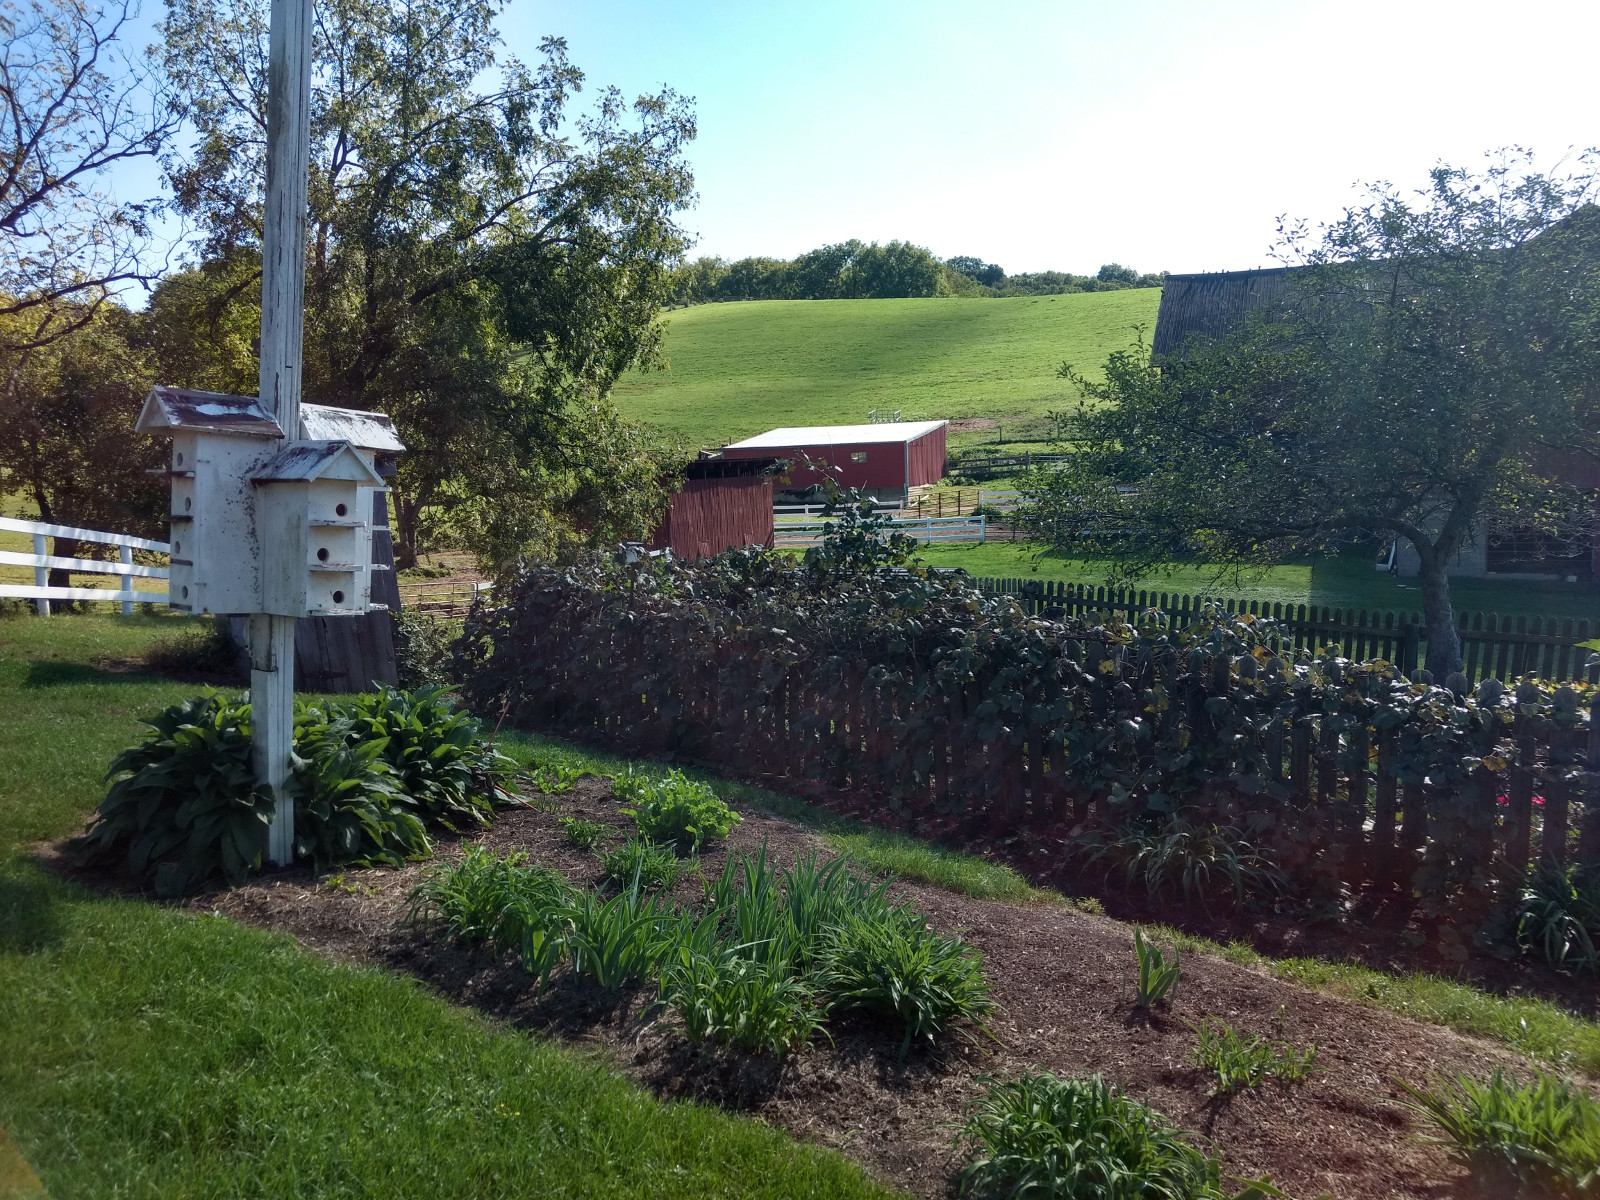 A garden in the Ohio Amish country